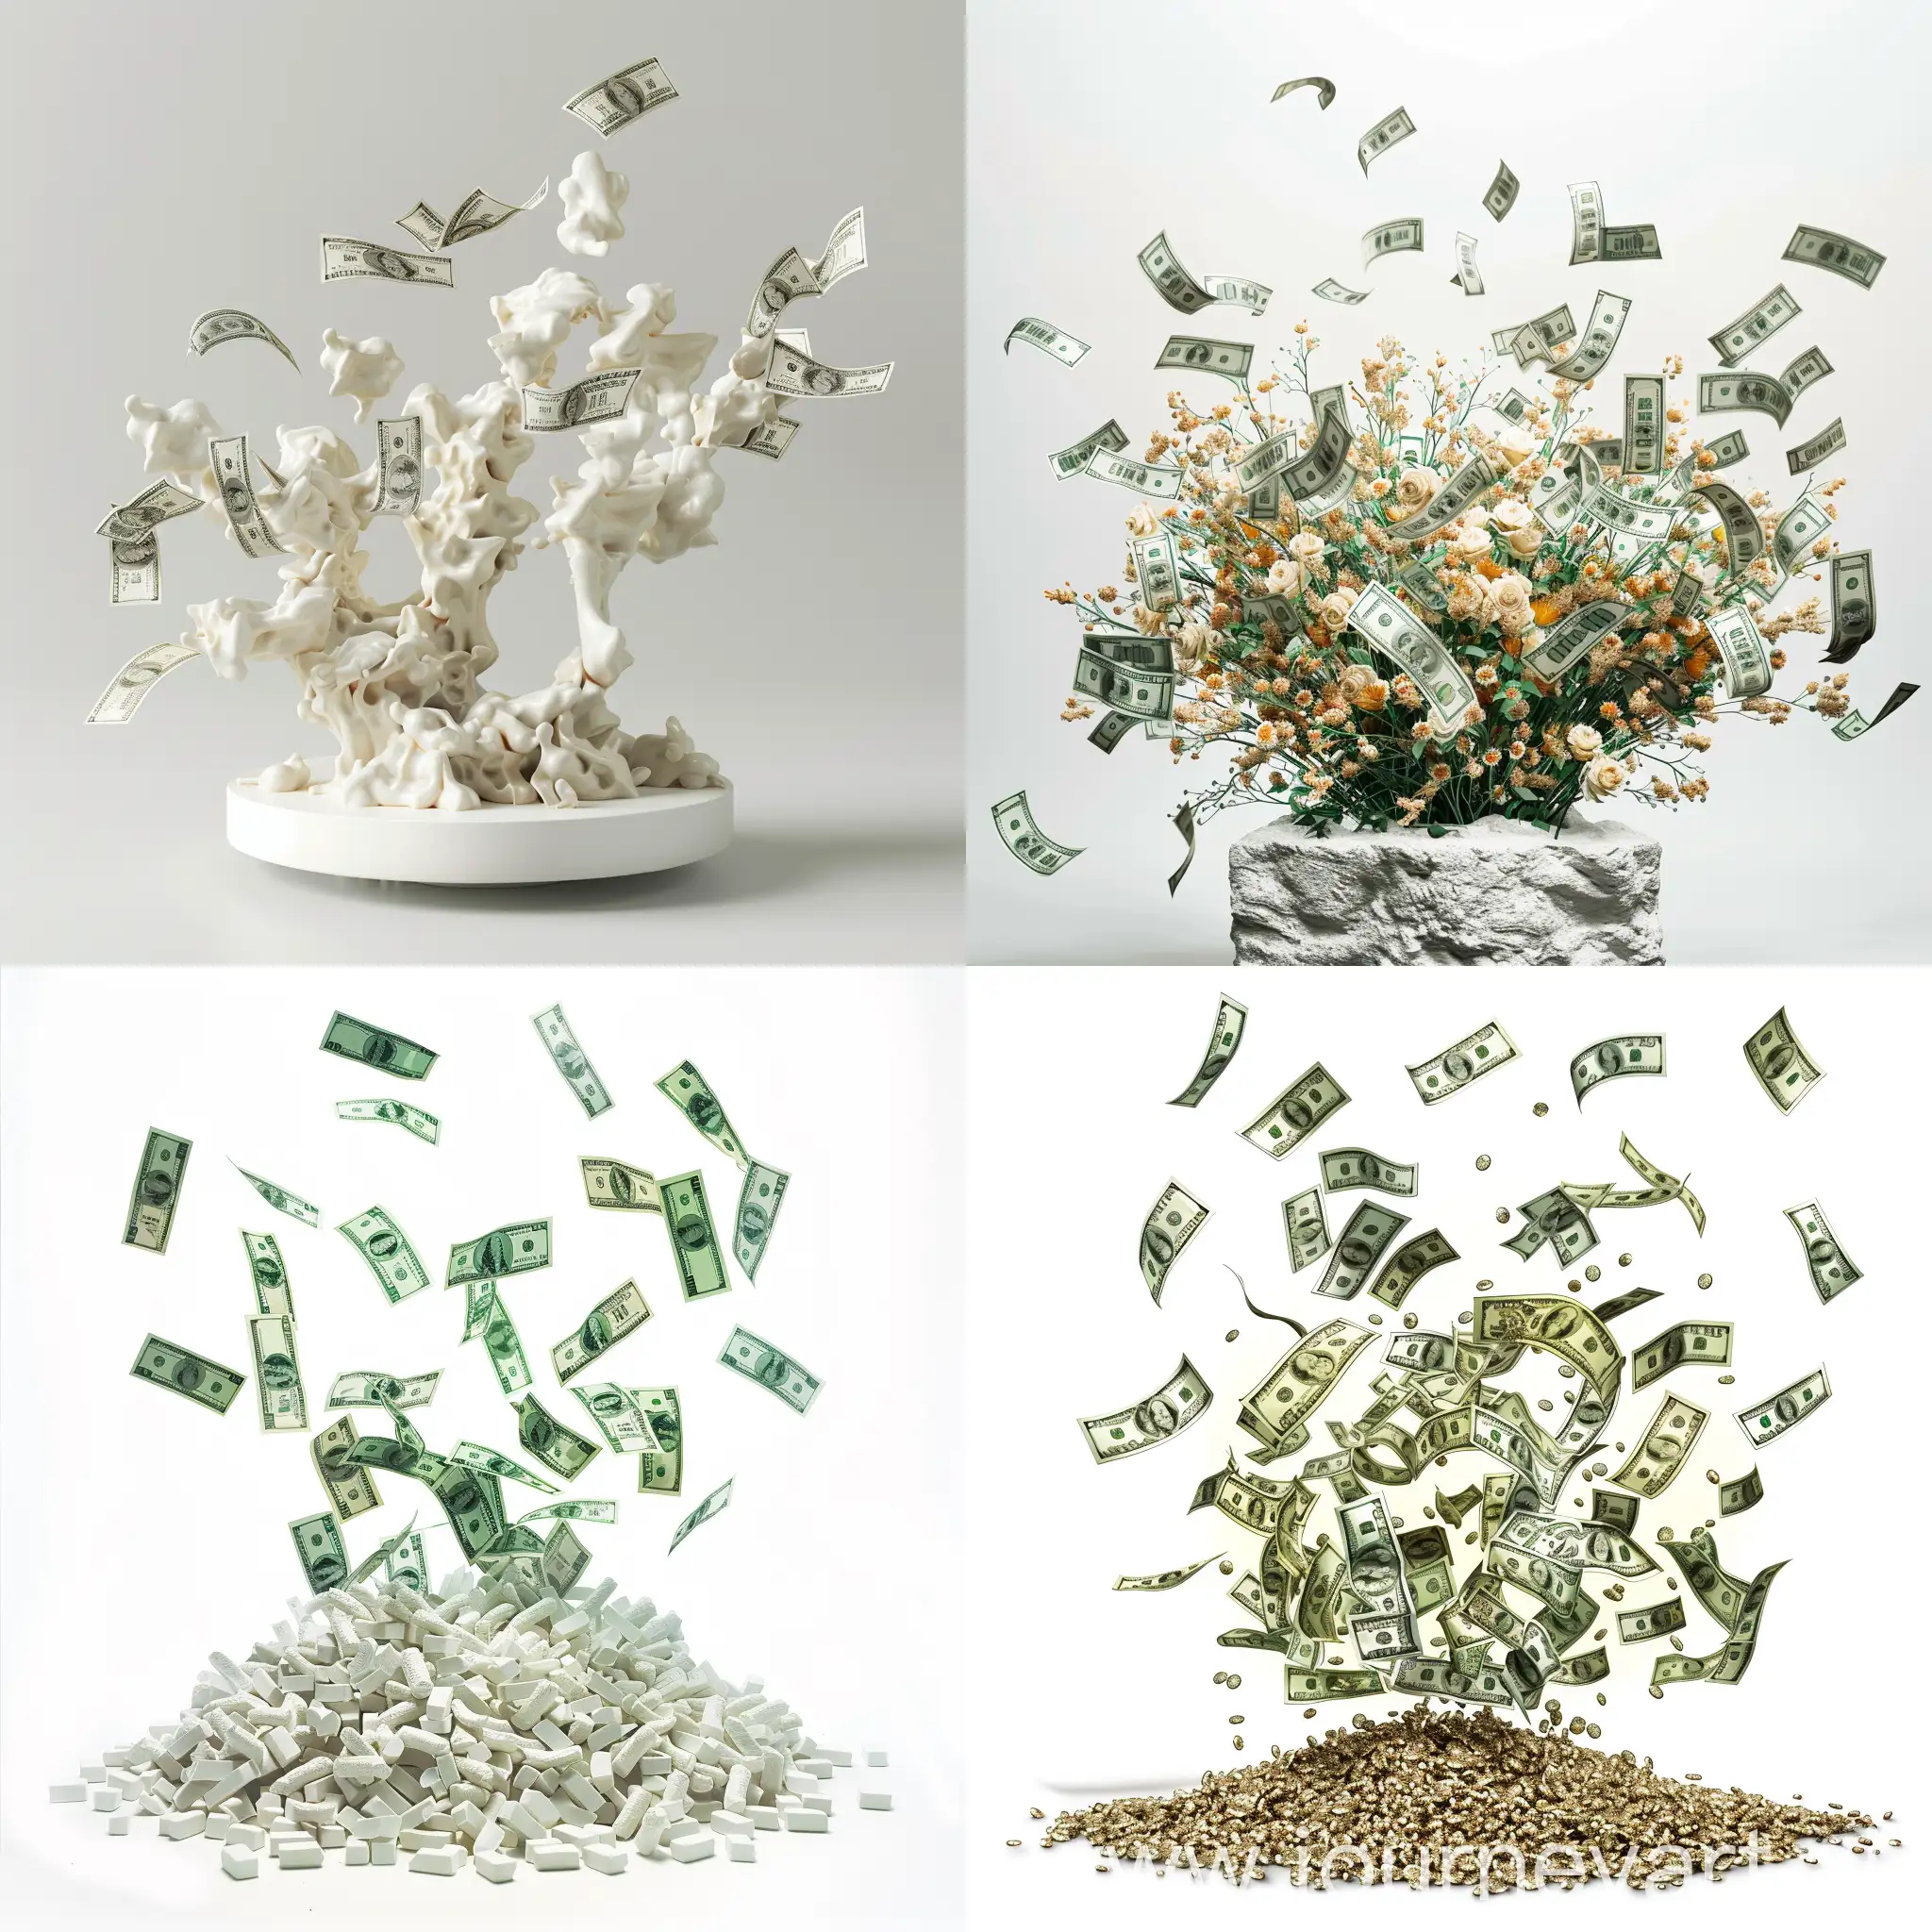 illustration a minimal graphic image about a lot of dollars throwing on a resin art with plain white background (Code: FFFF)